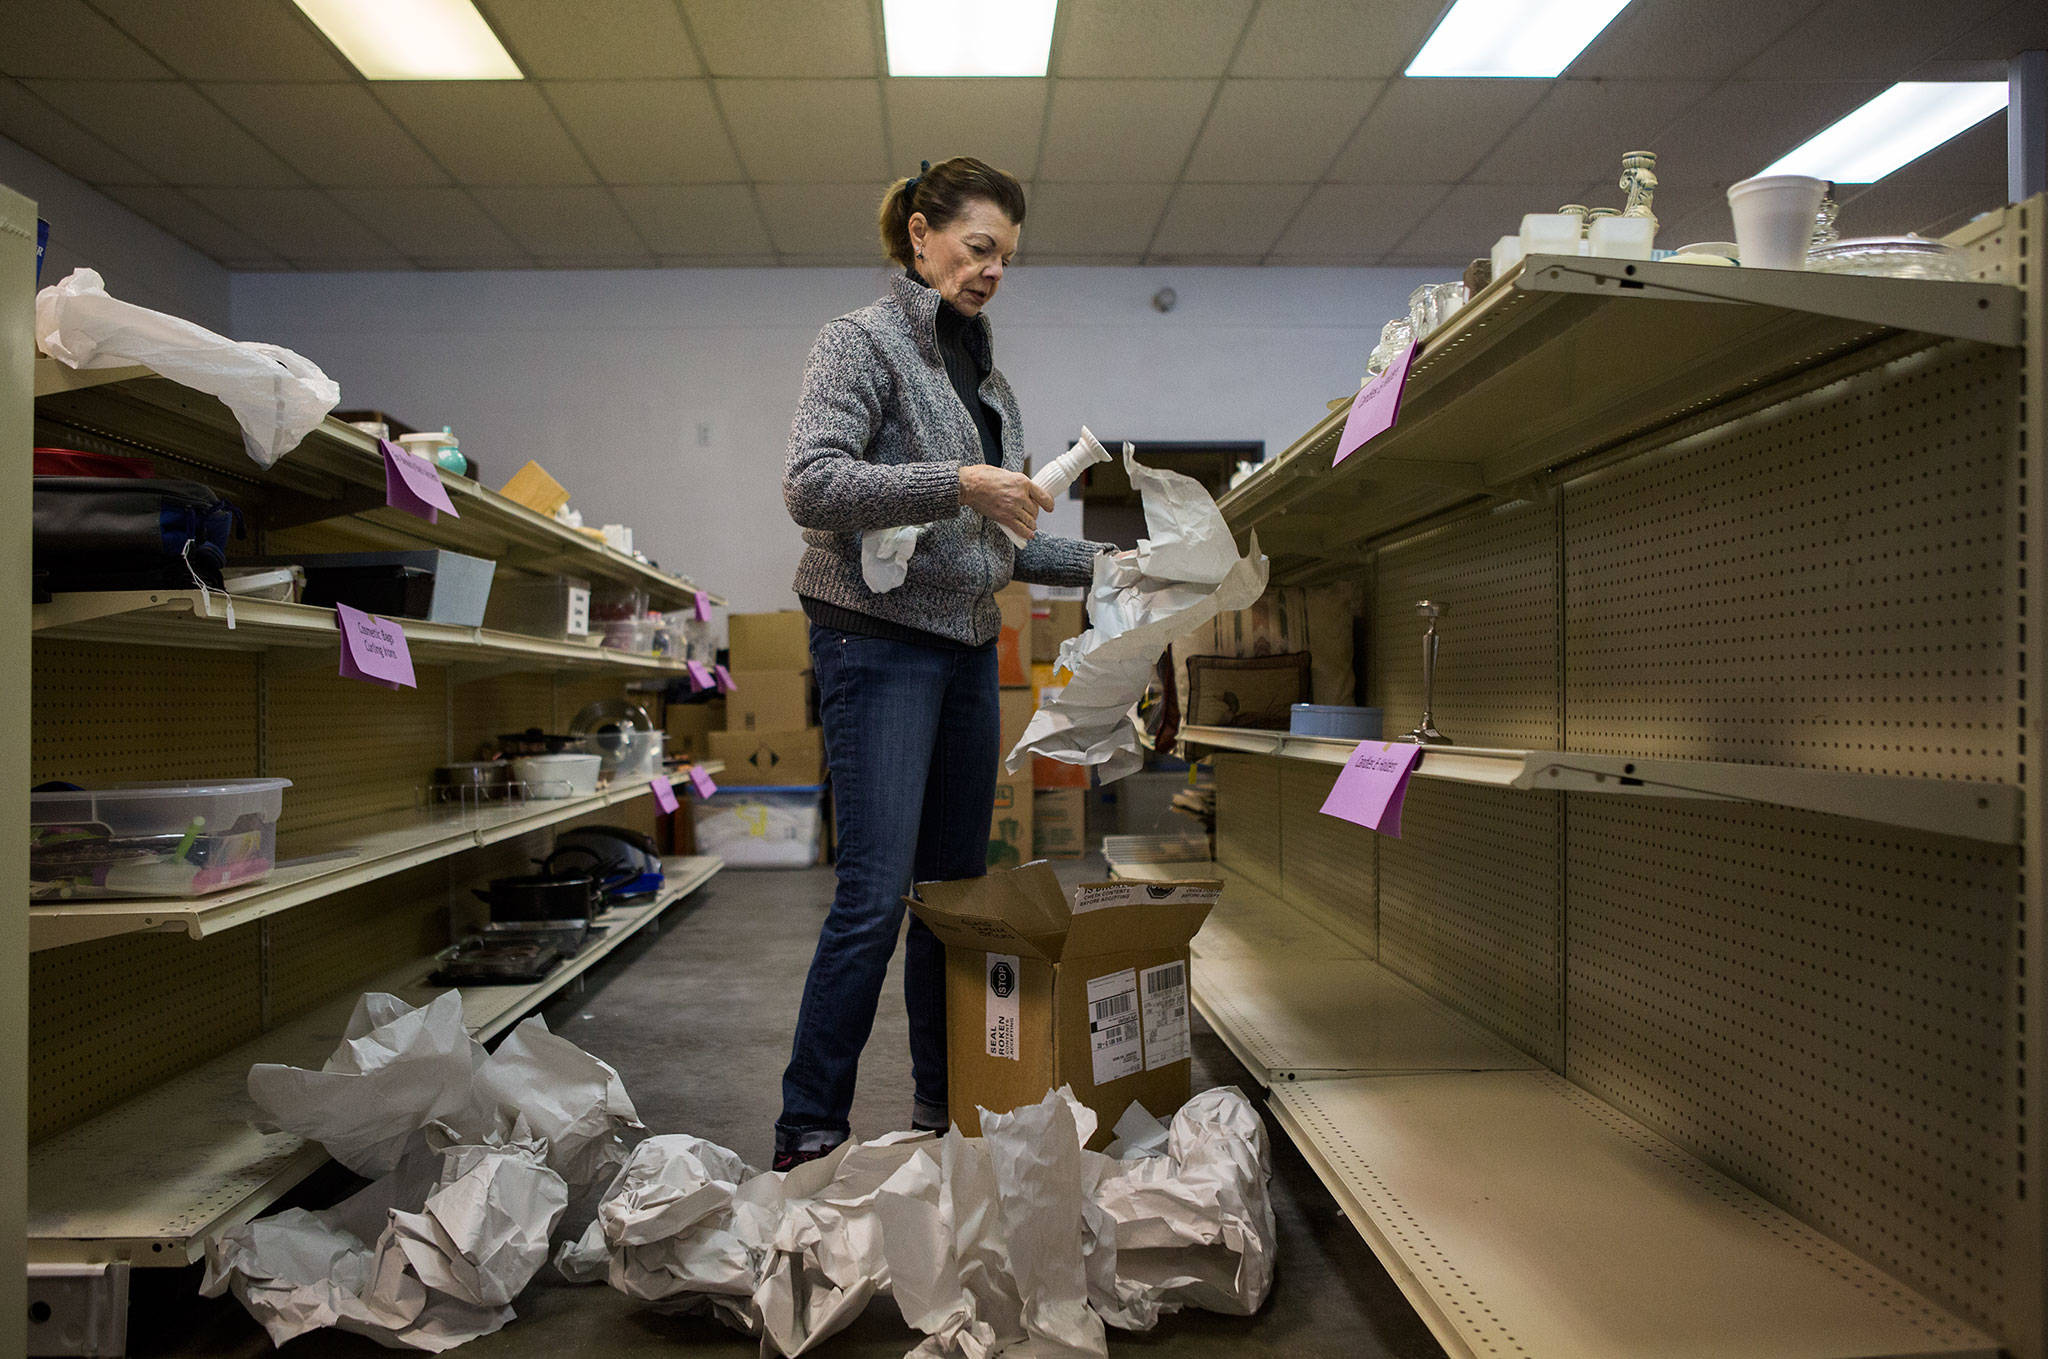 Marilyn Nadeau helps unpack donation boxes at the Edmonds Senior Center’s new thrift store. The store will have a soft opening on Jan. 16 and a grand opening on Jan. 19. (Olivia Vanni / The Herald)